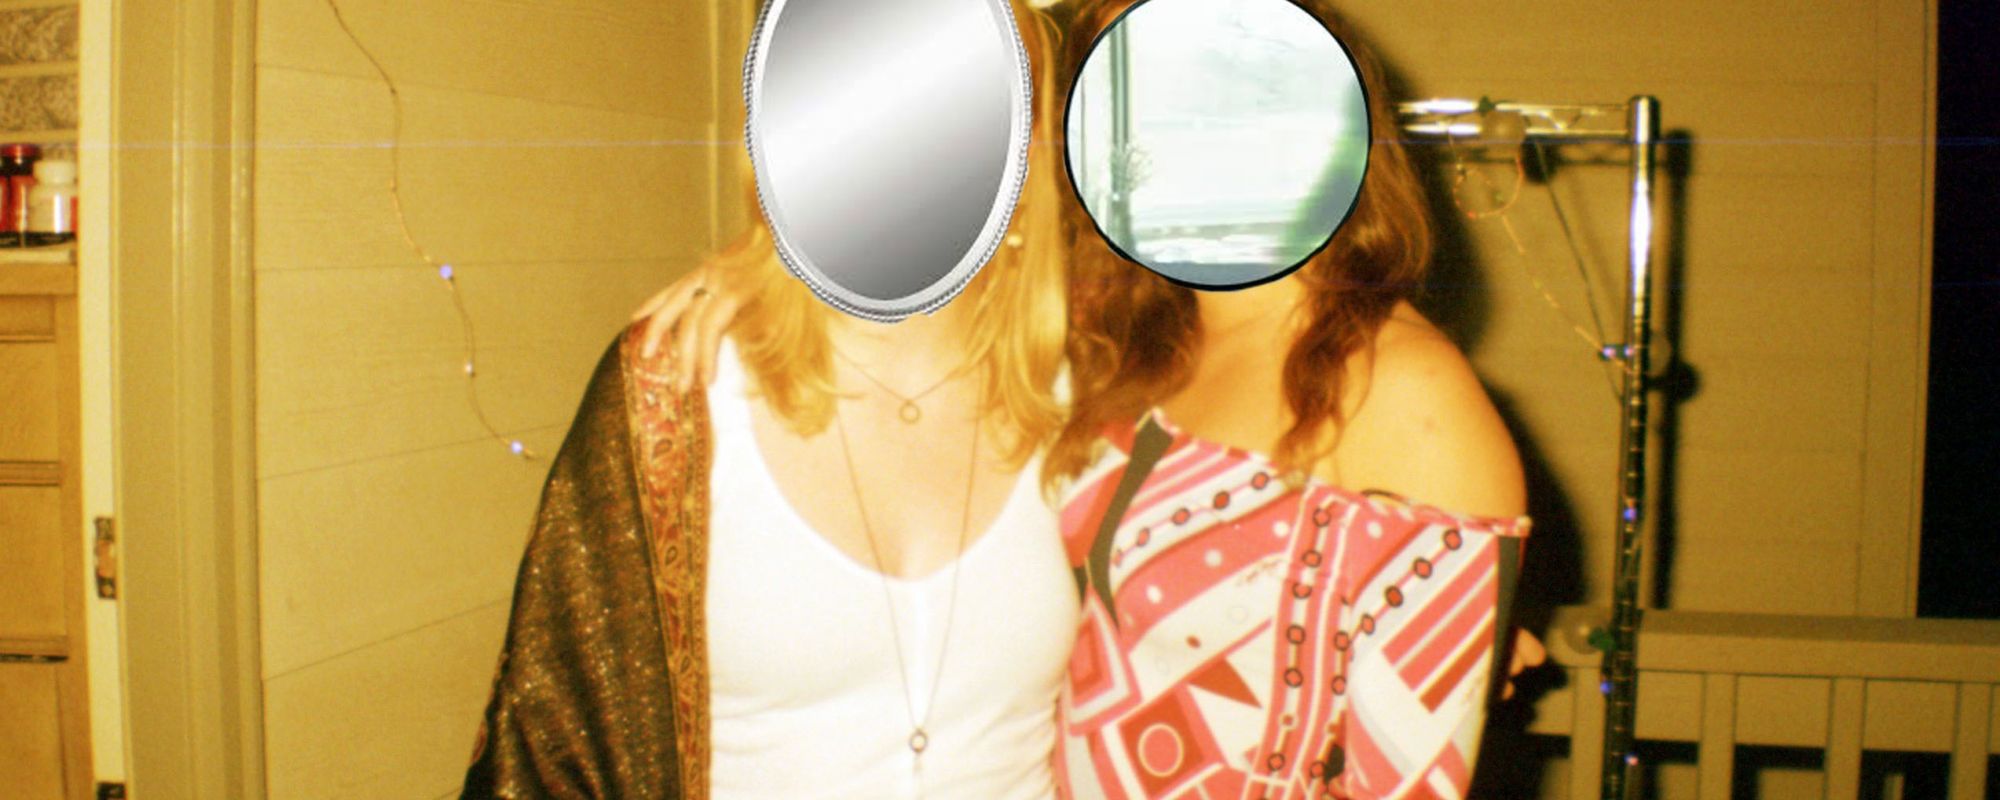 A photo of two women with mirrors where their faces should be.